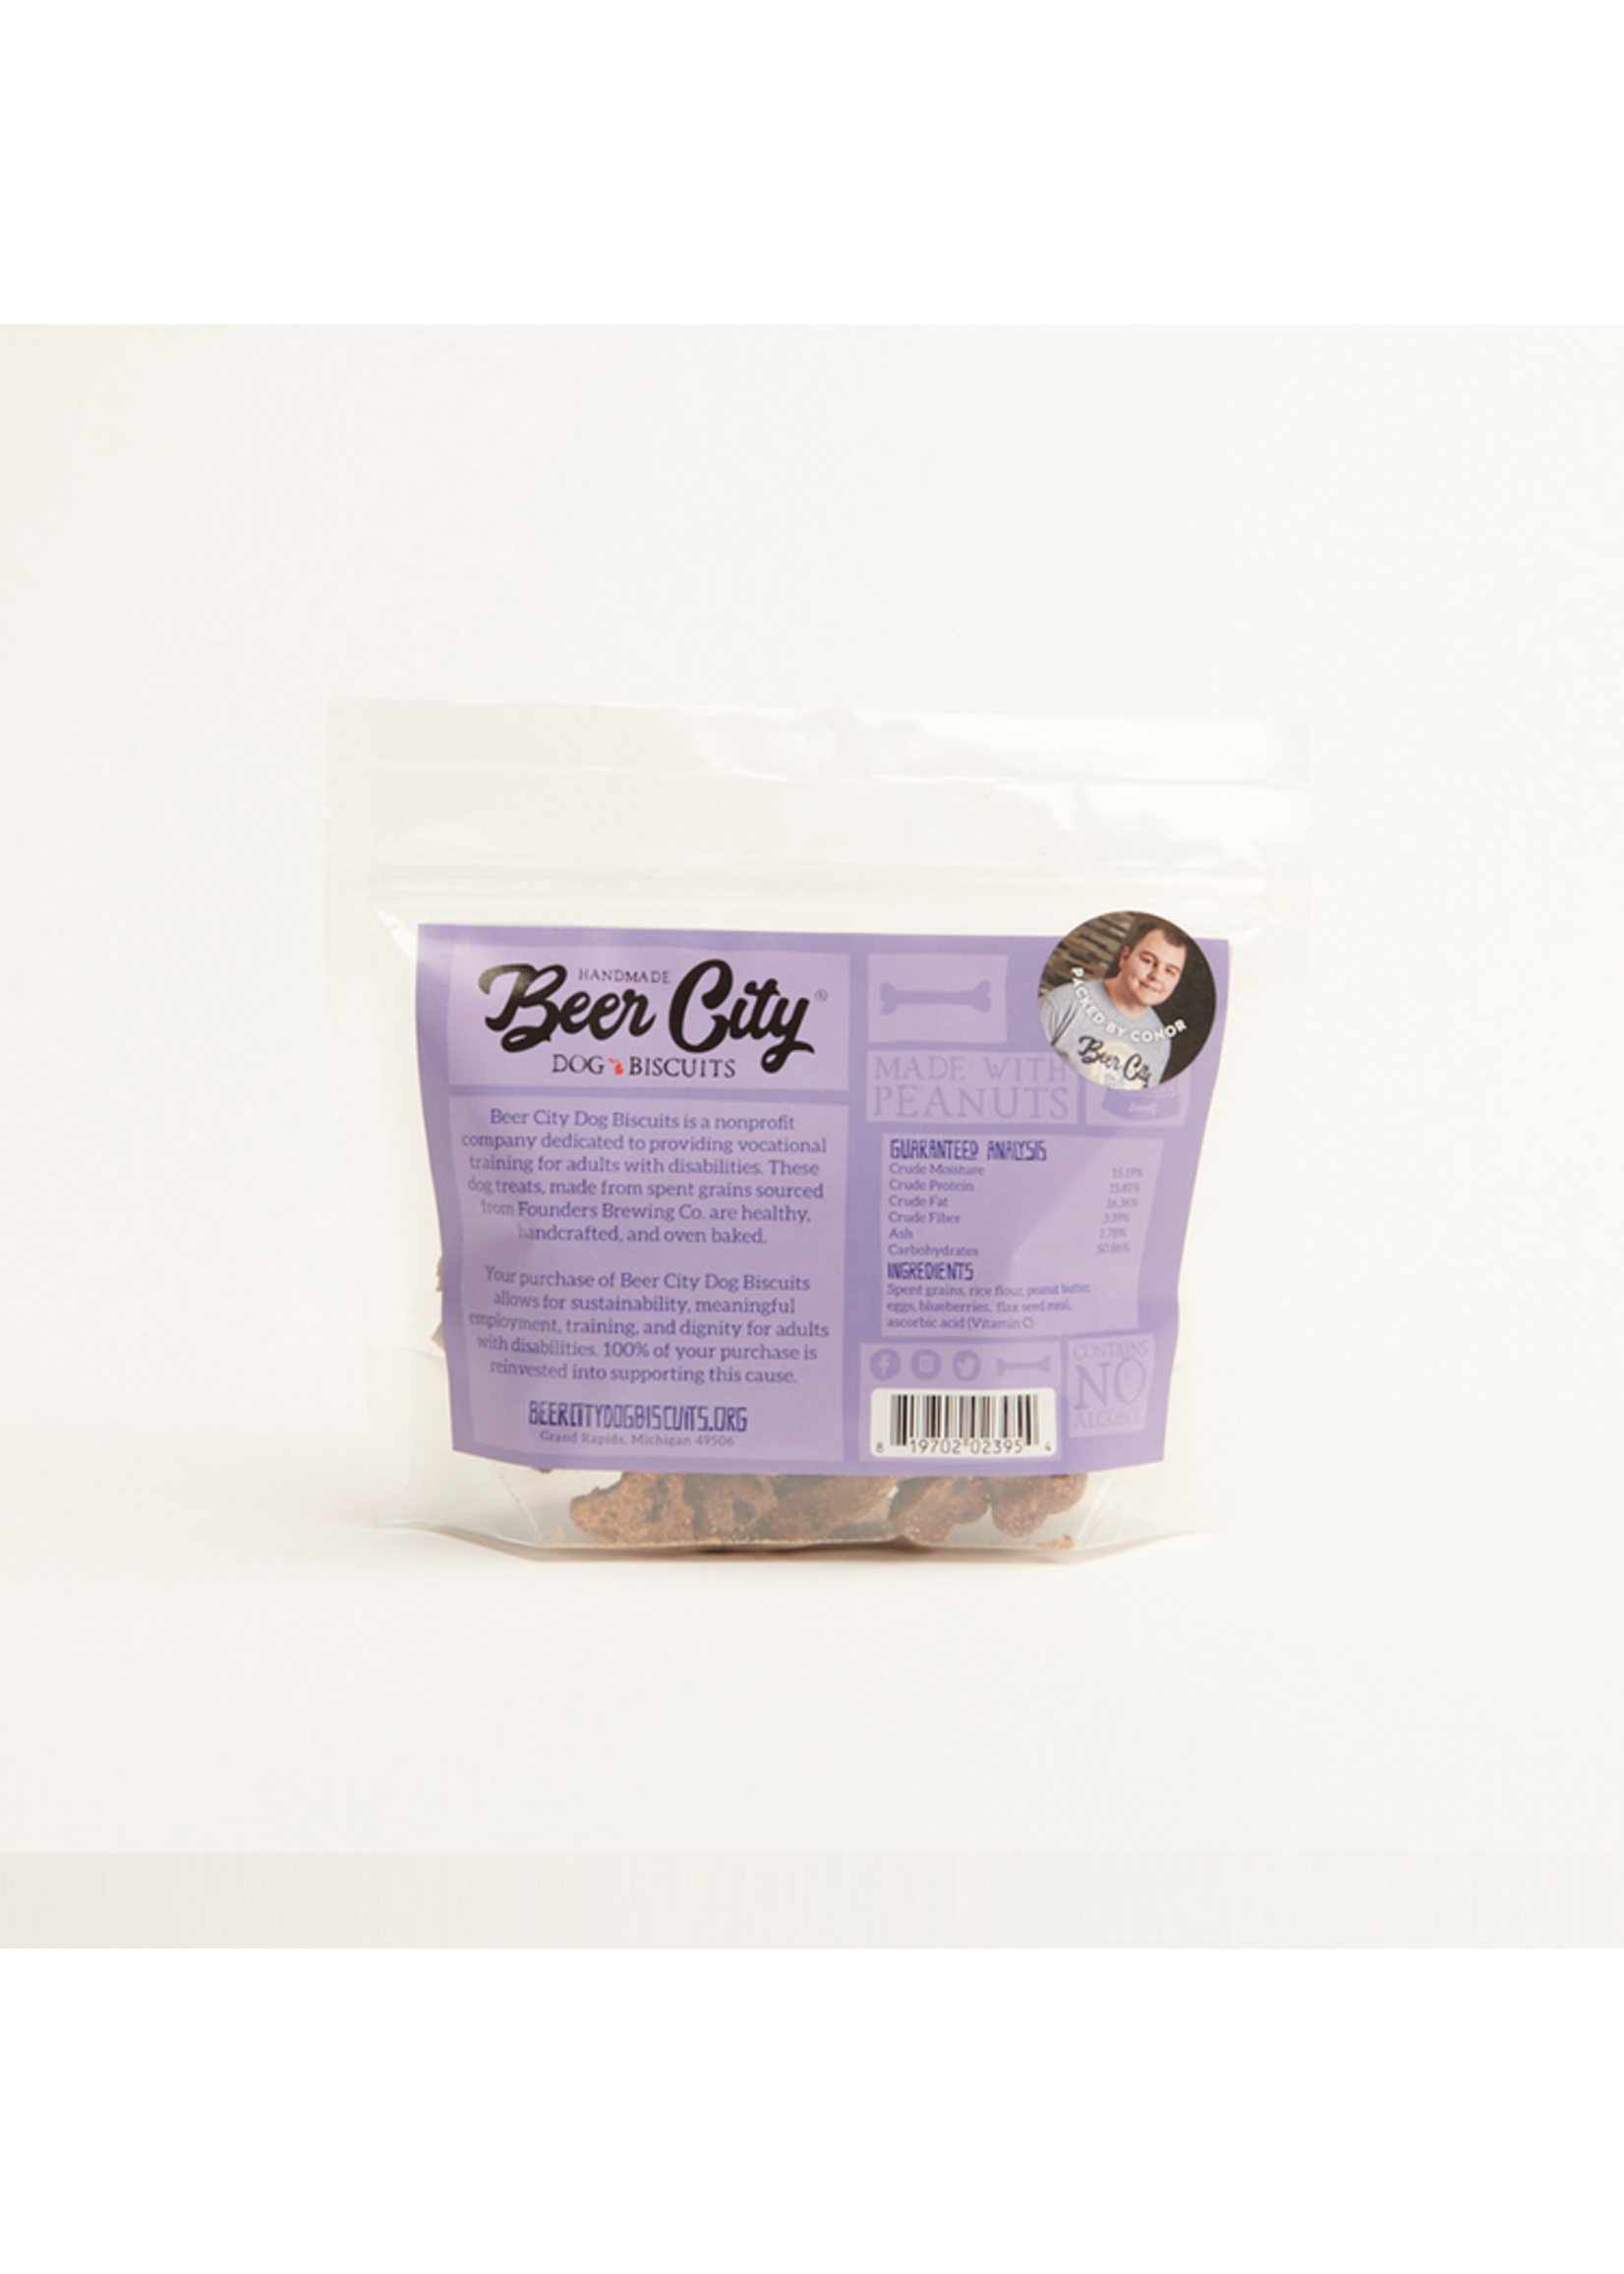 Beer City Dog Biscuits 8oz Blueberry Flaxeed Biscuits